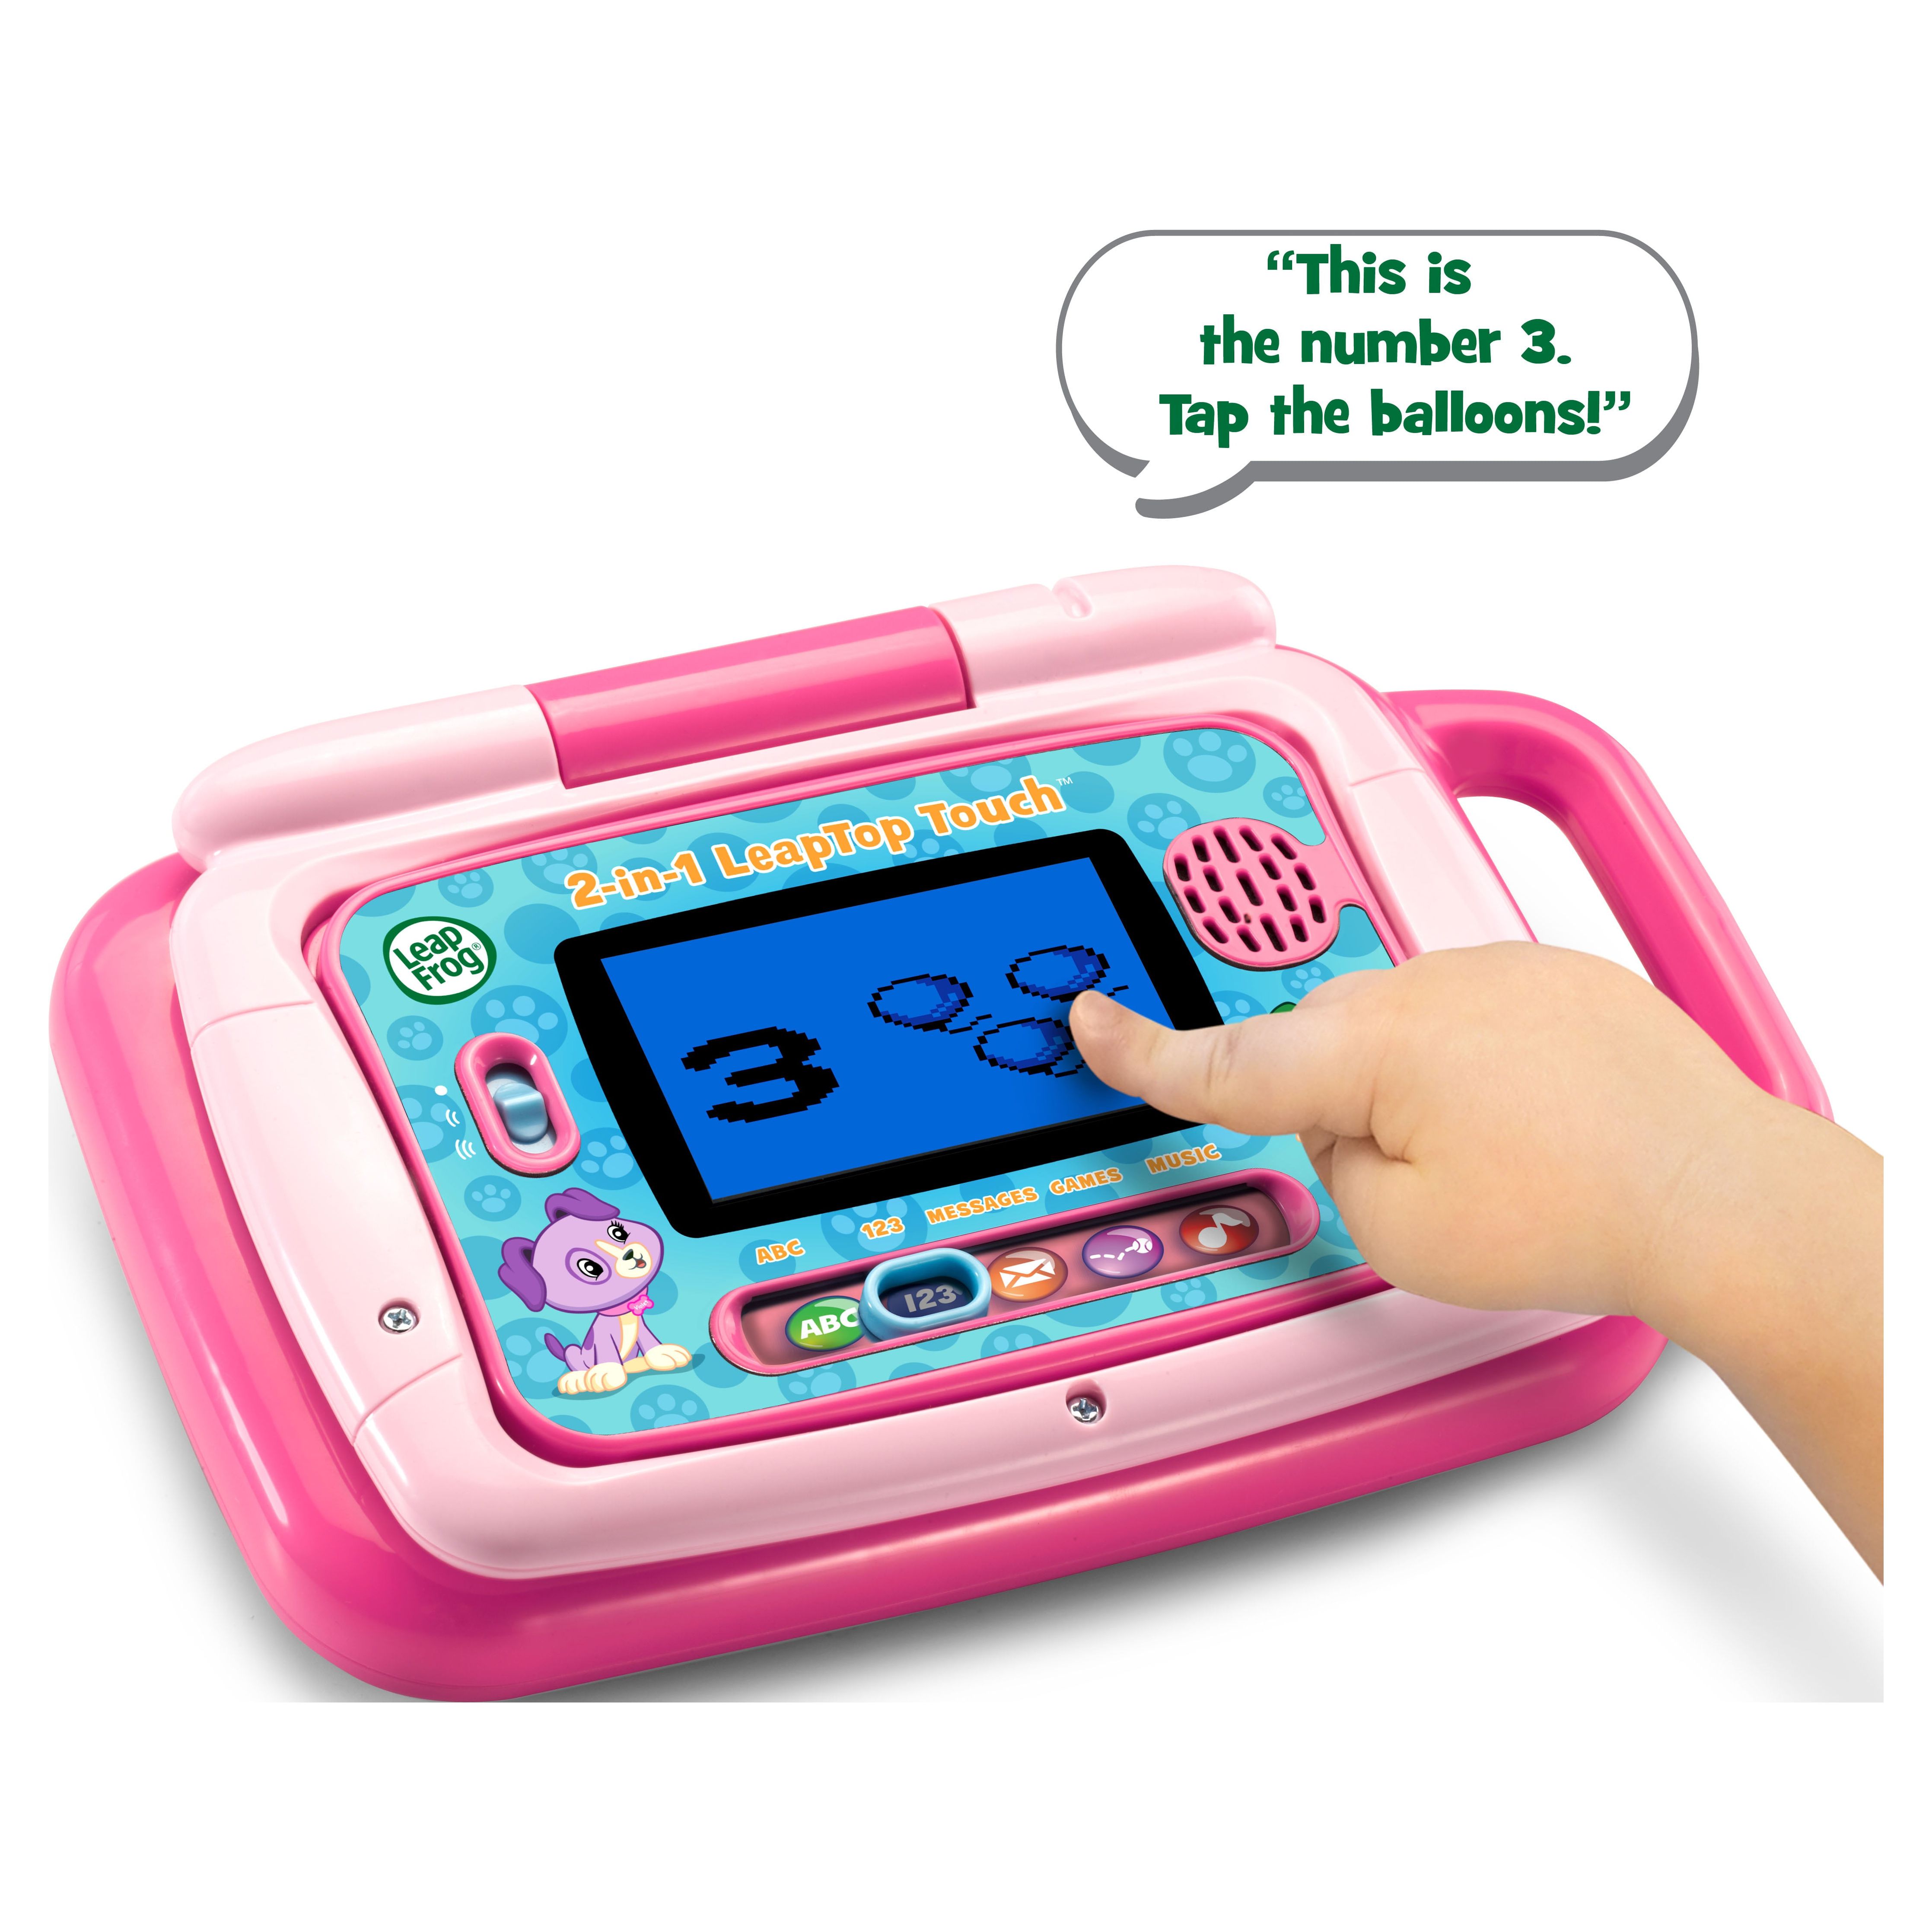 LeapFrog 2-in-1 LeapTop Touch for Toddlers, Electronic Learning System, Teaches Letters, Numbers - image 7 of 12